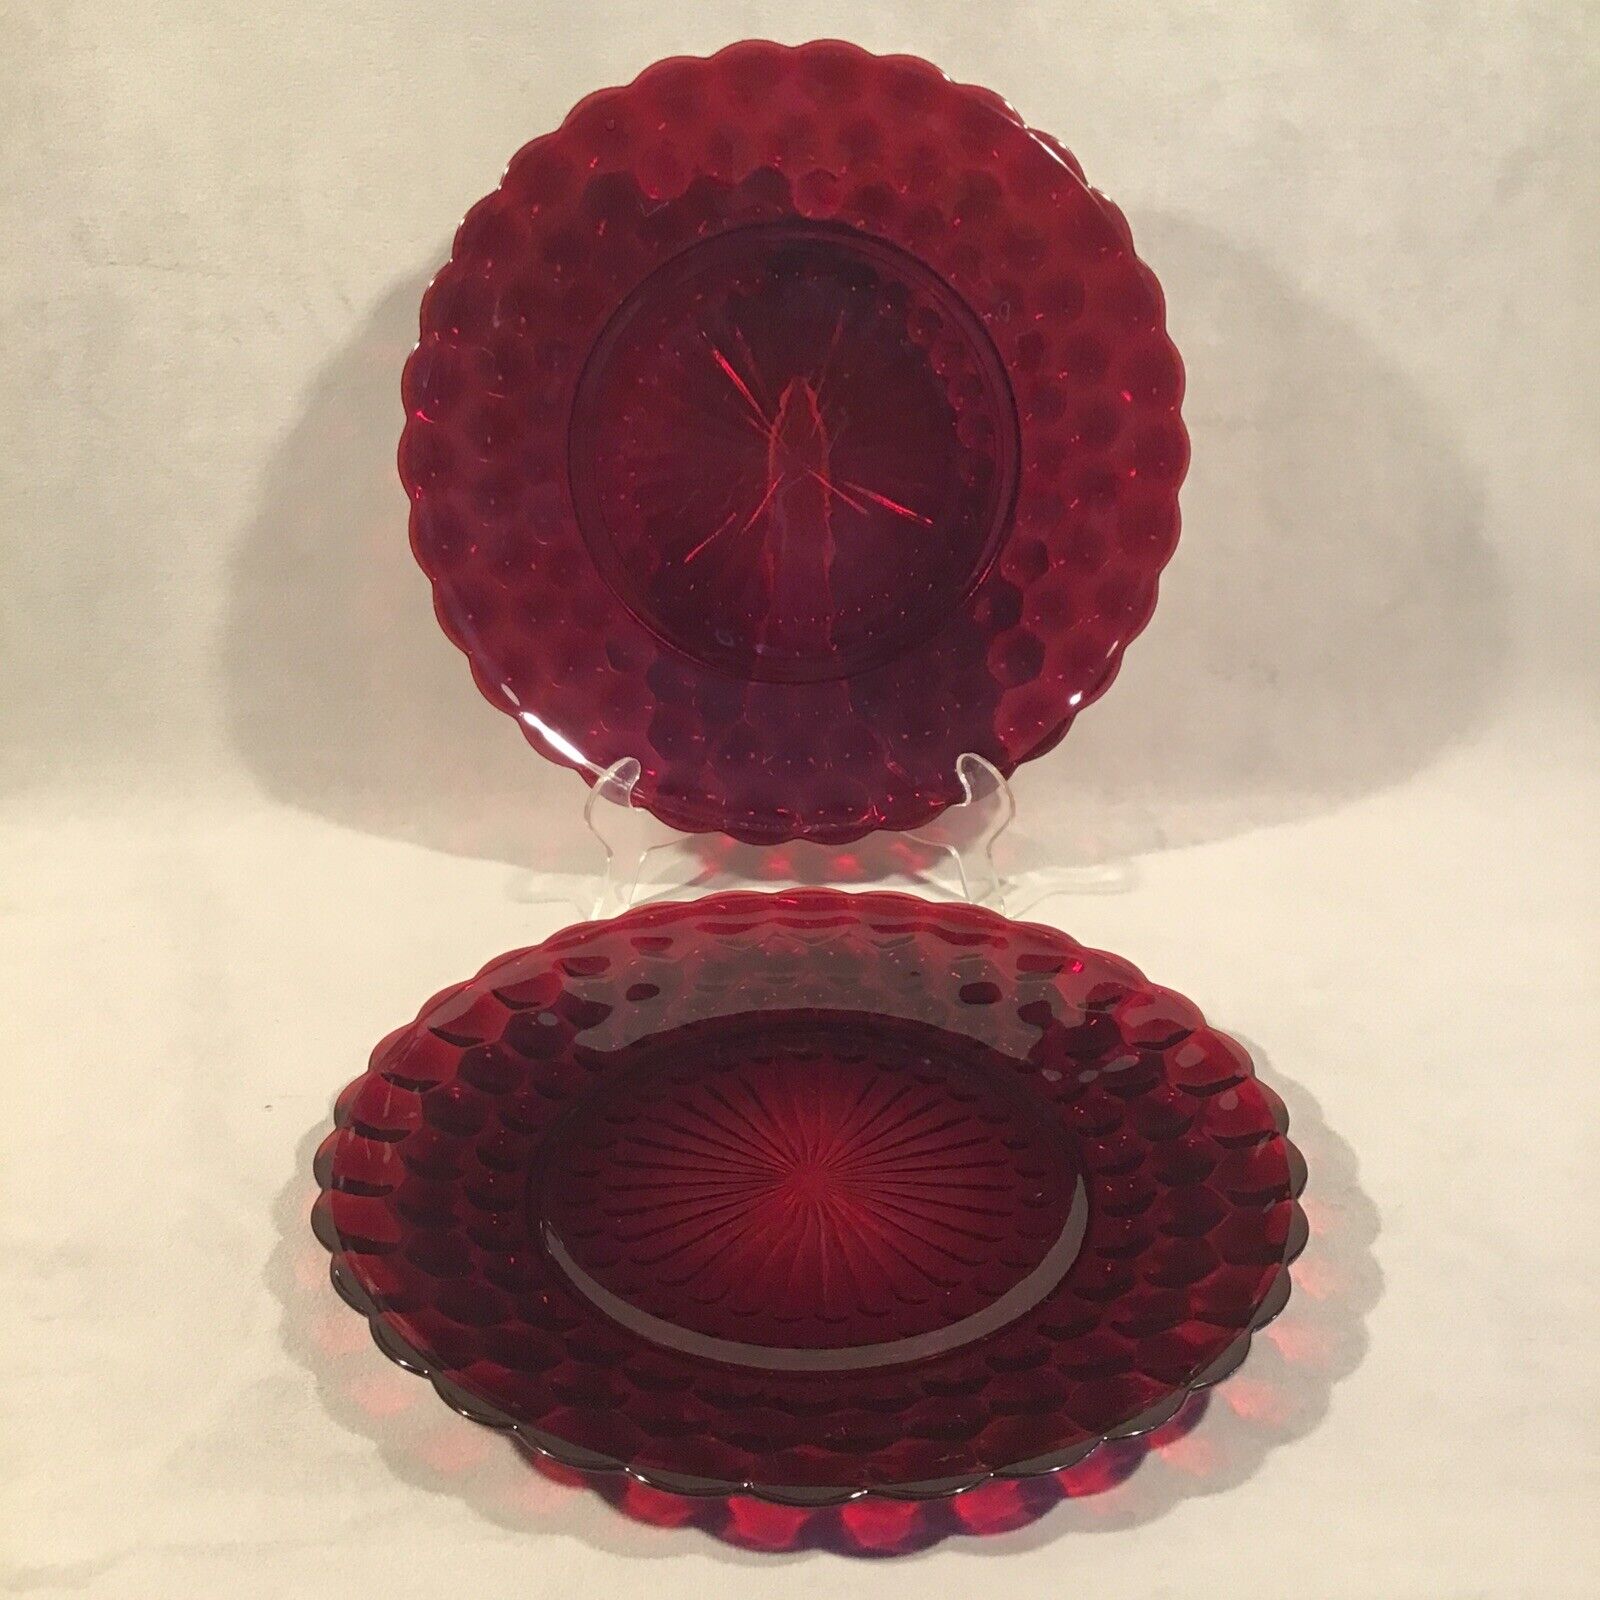 PV07958 Vintage Anchor Hocking Ruby BUBBLE Dinner Plate - 2pcs